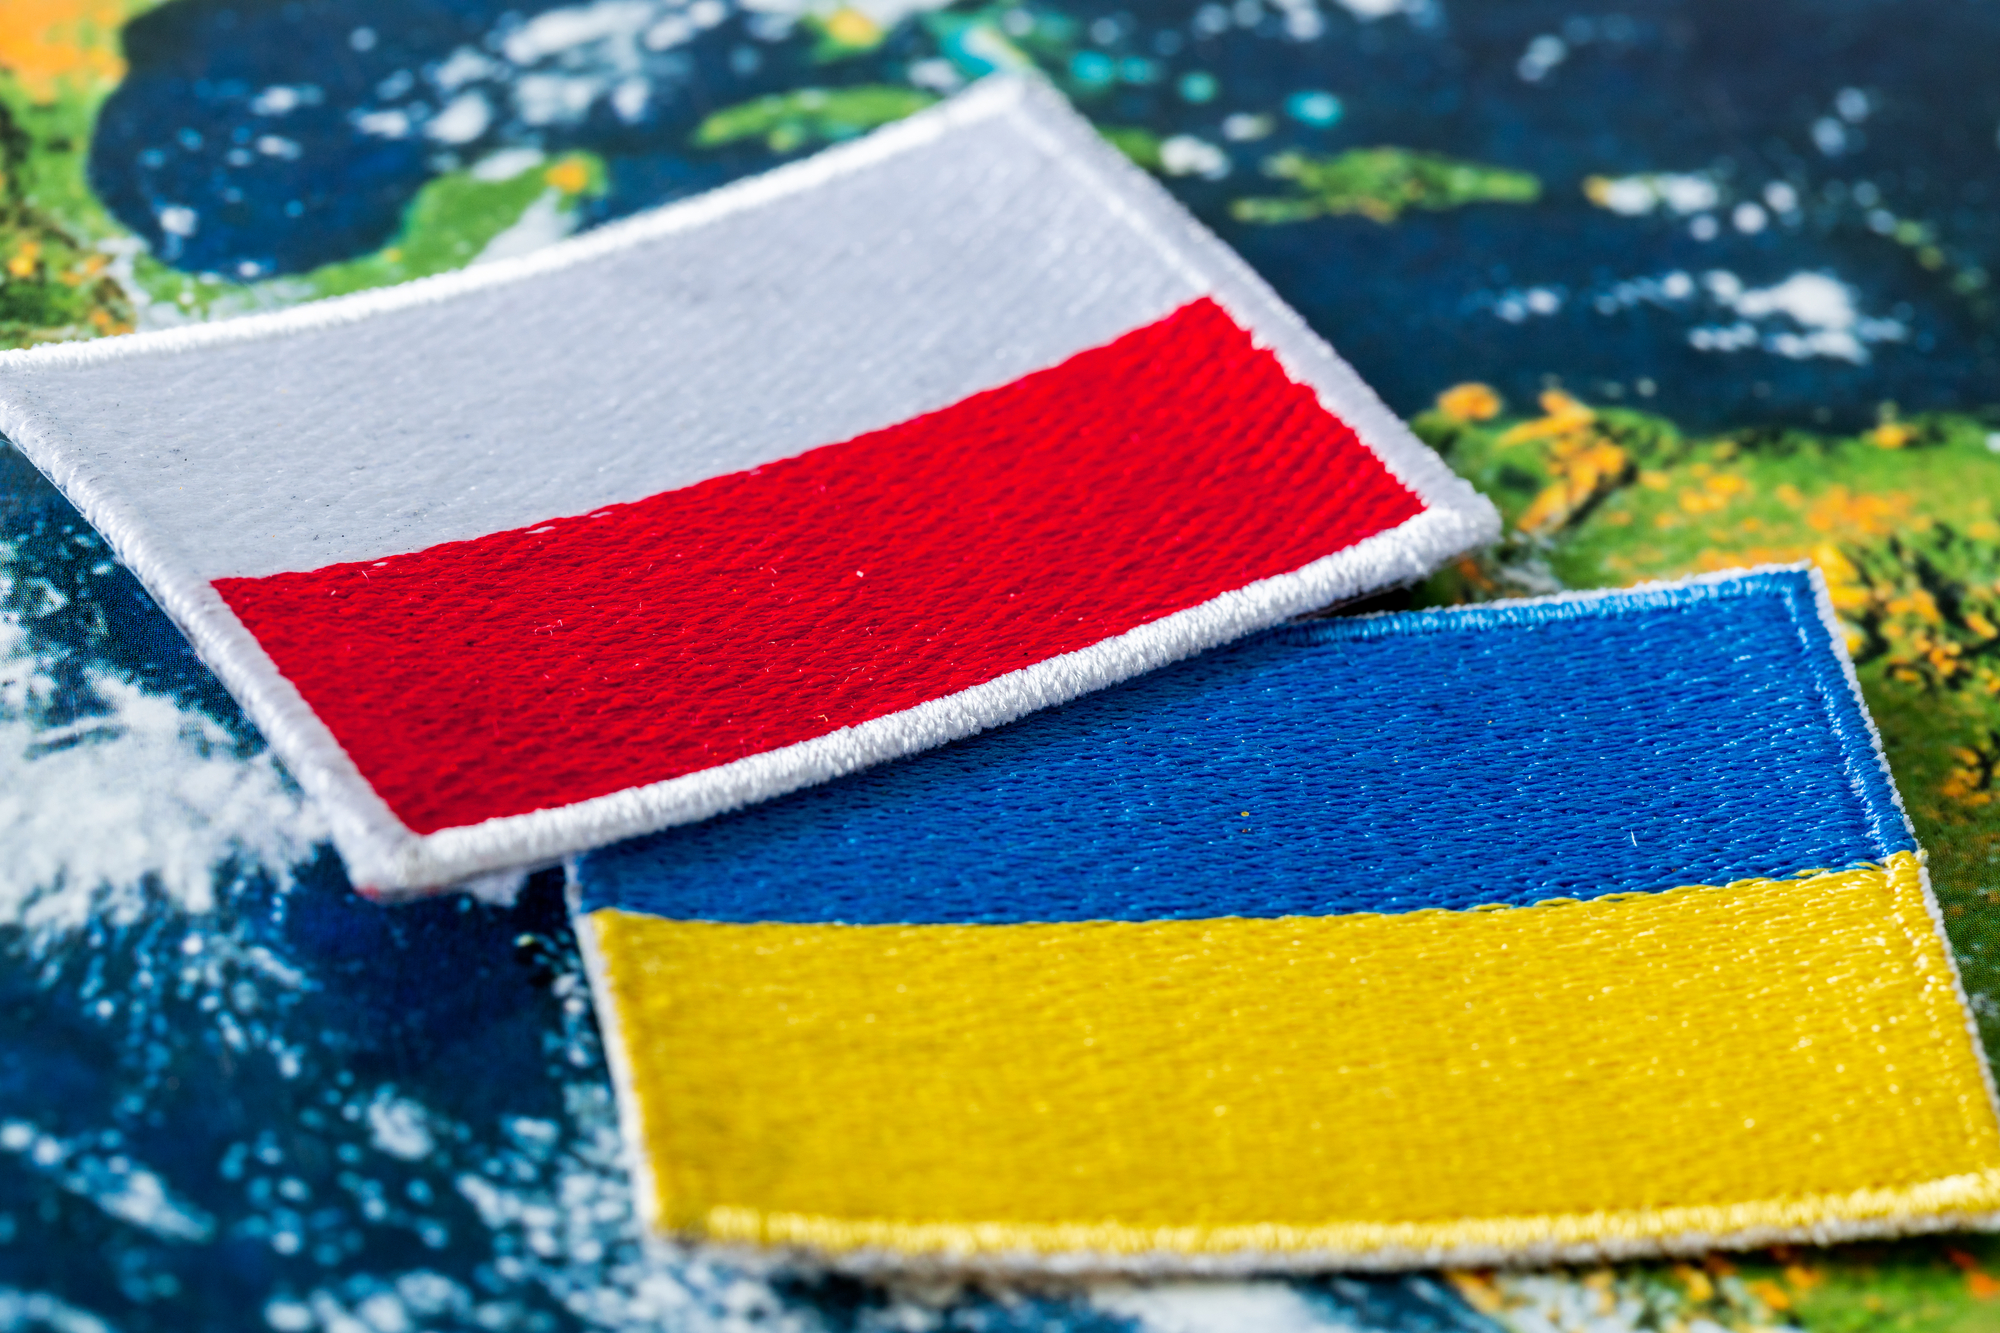 The flag of Ukraine and Poland, The concept of cooperation and friendship between countries despite a painful and difficult history